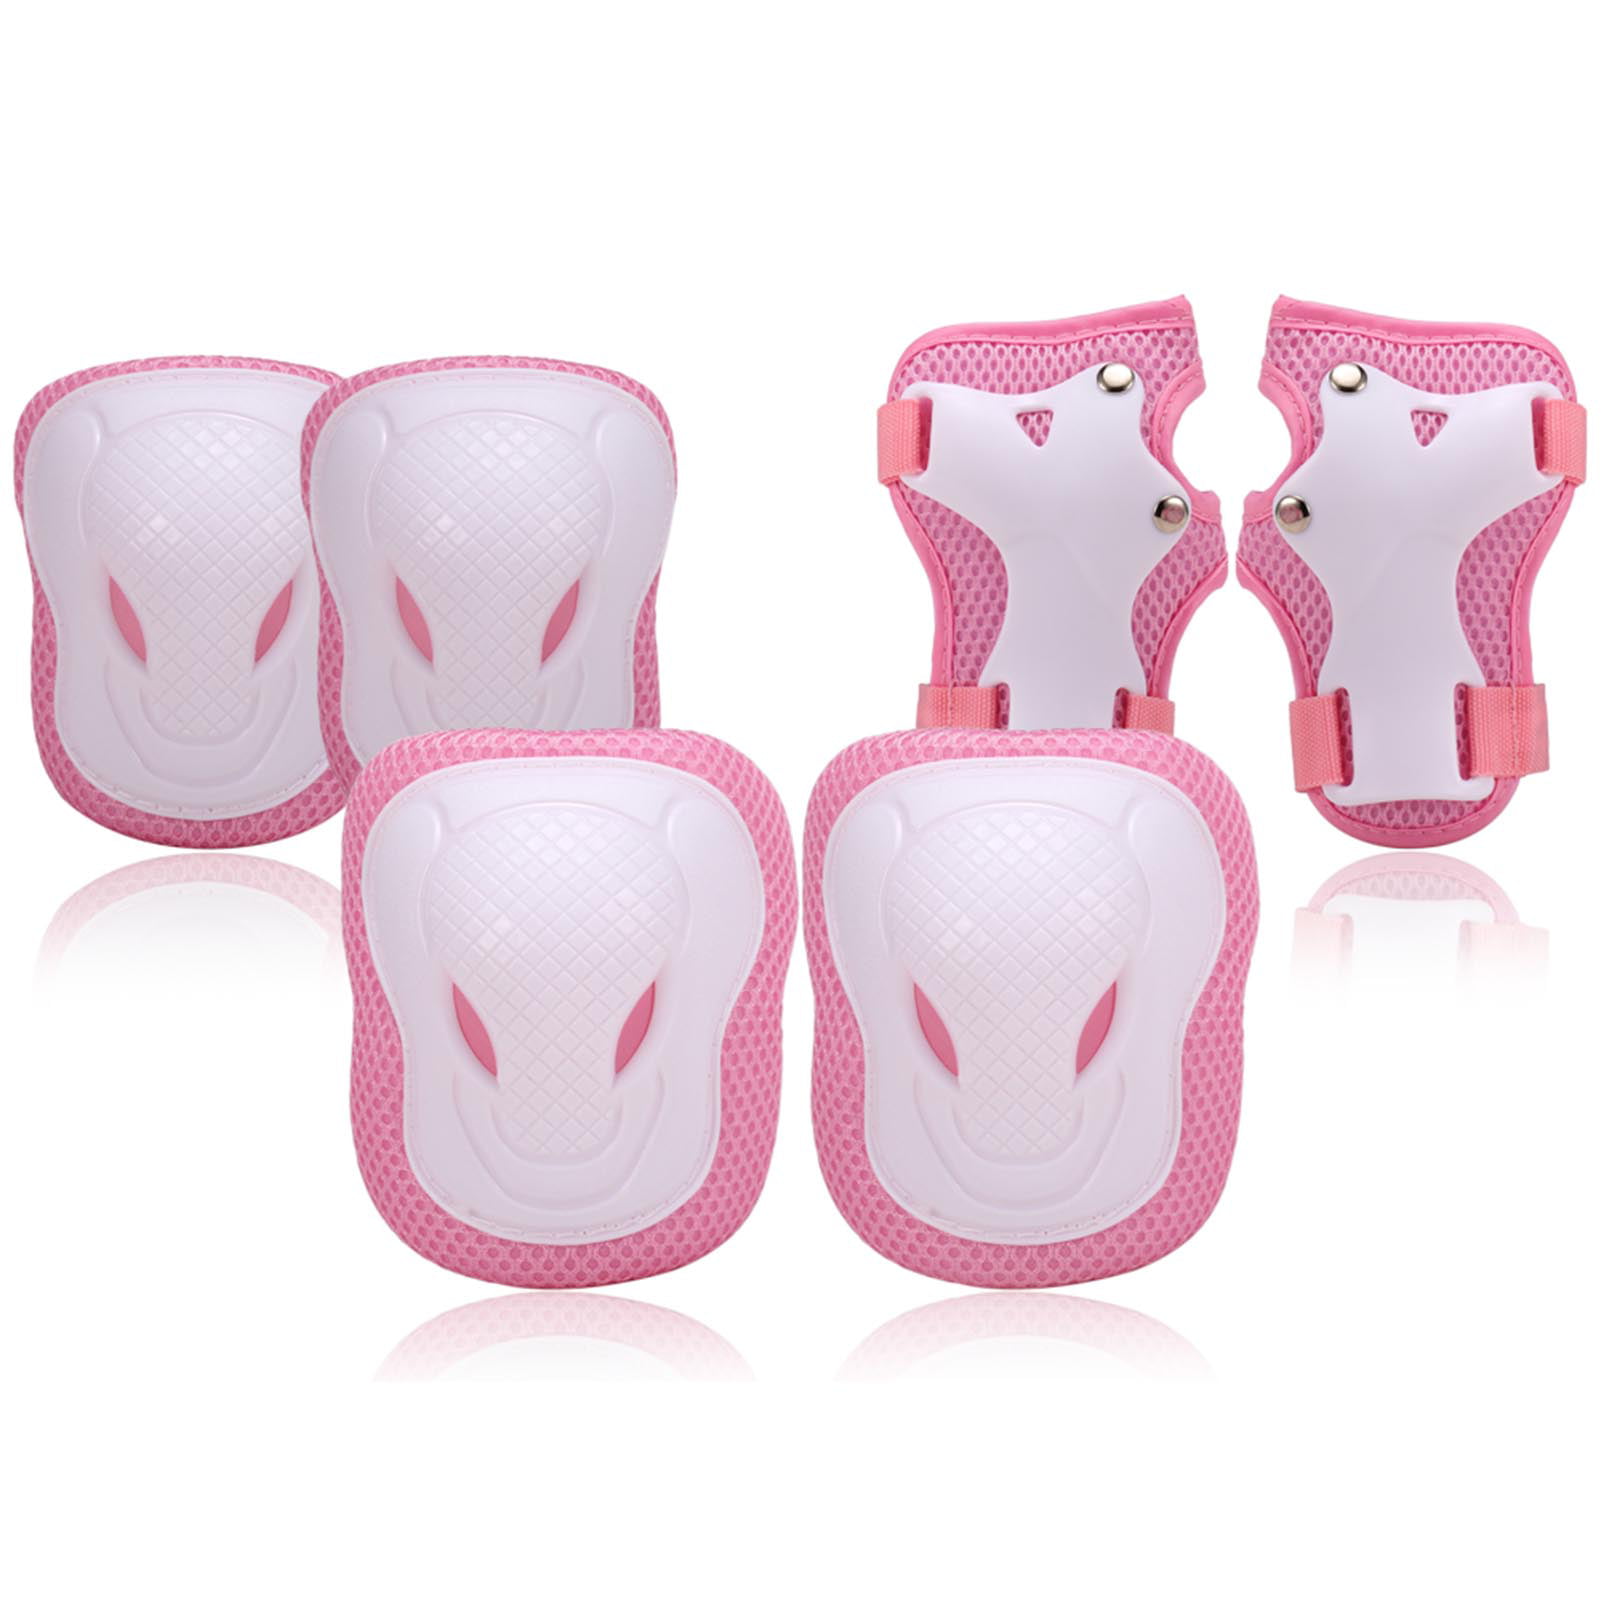 Wrist Elbow Physport 6 pcs set Childs Pink Protective Gear Pads for Knee 